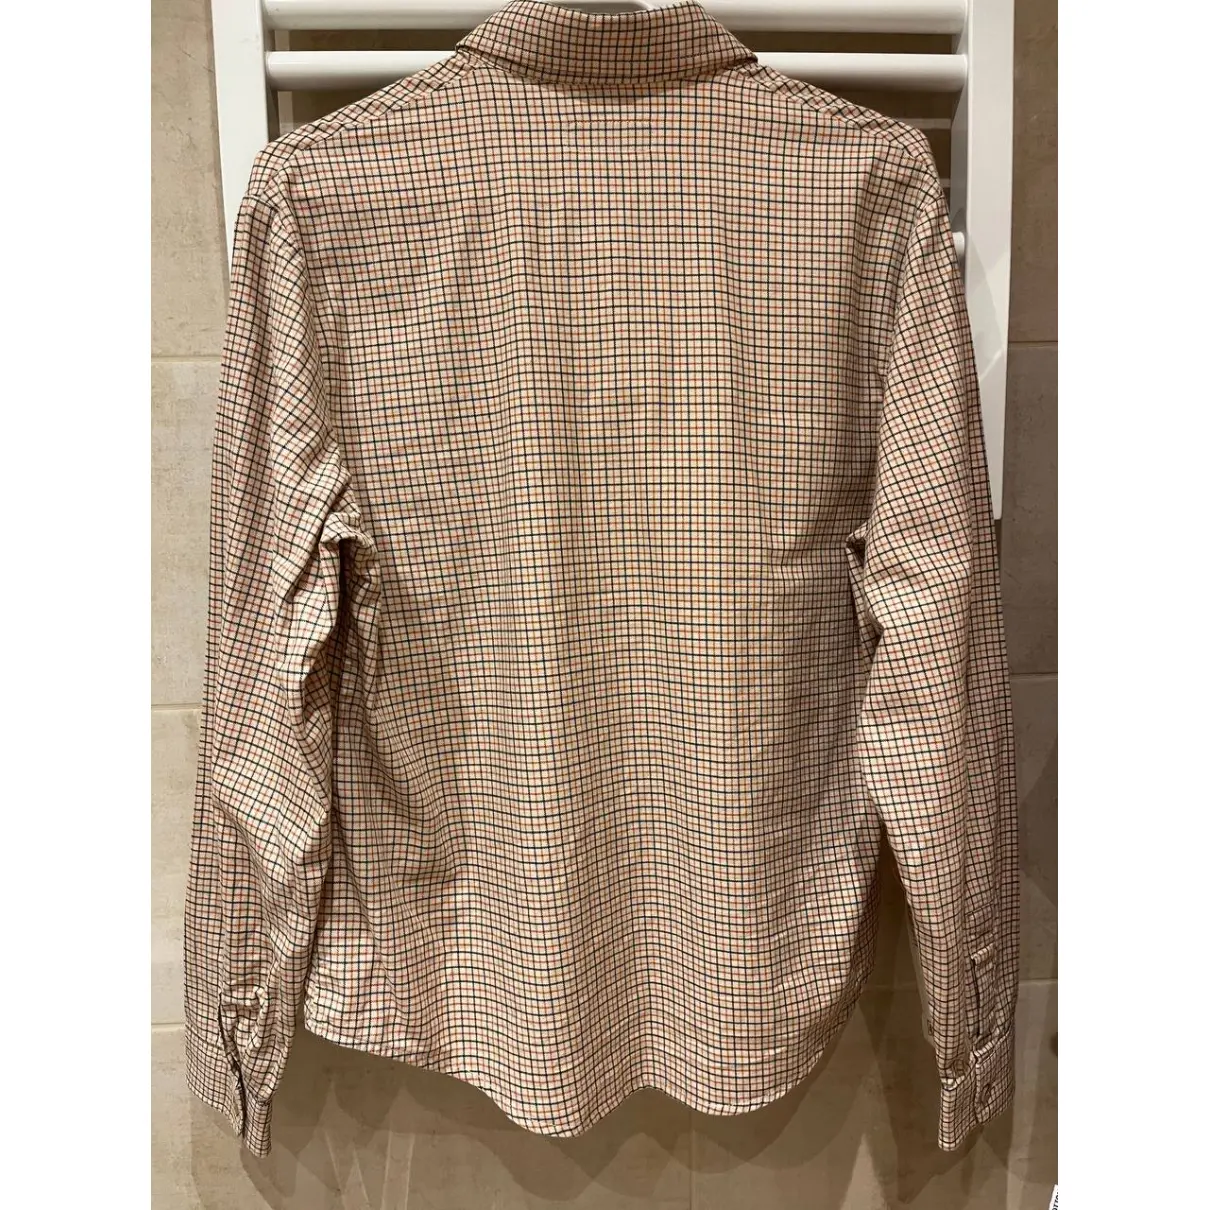 Buy Mulberry Shirt online